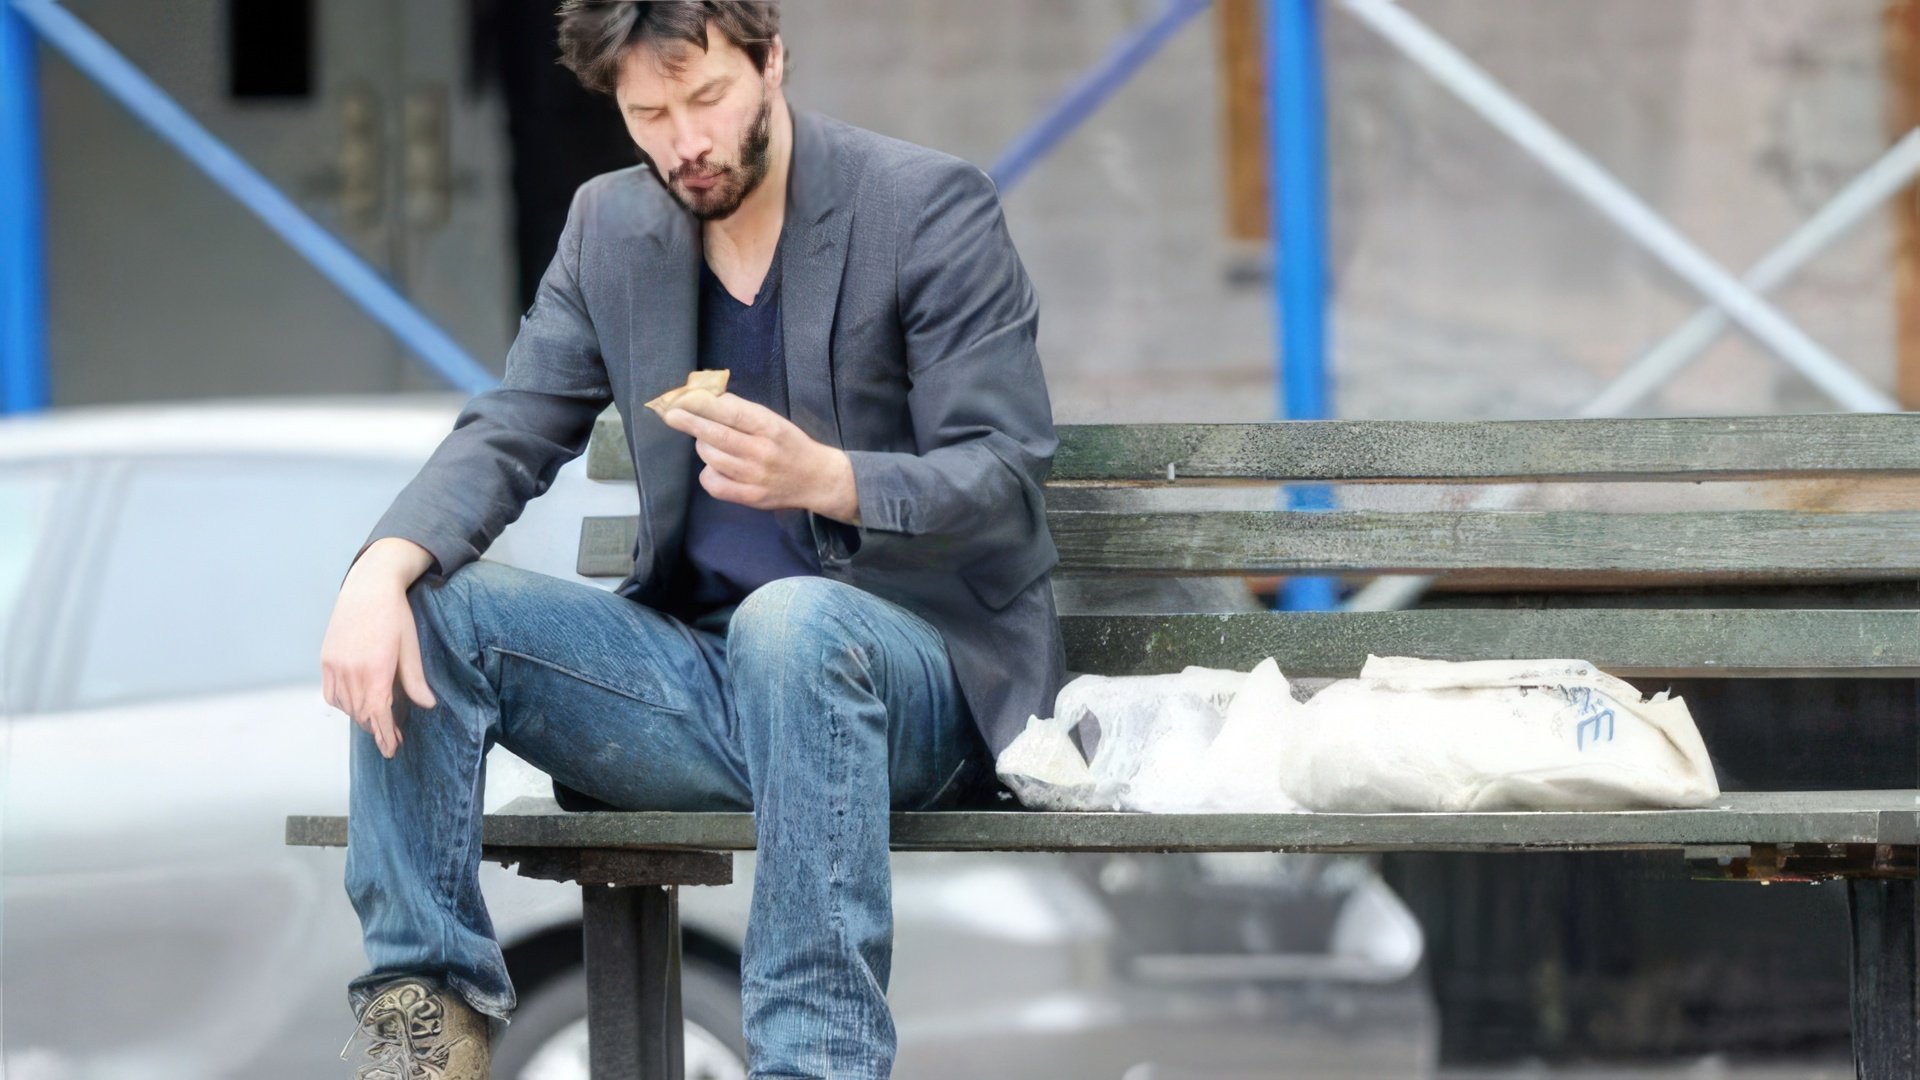 Picture that started the “Sad Keanu” meme